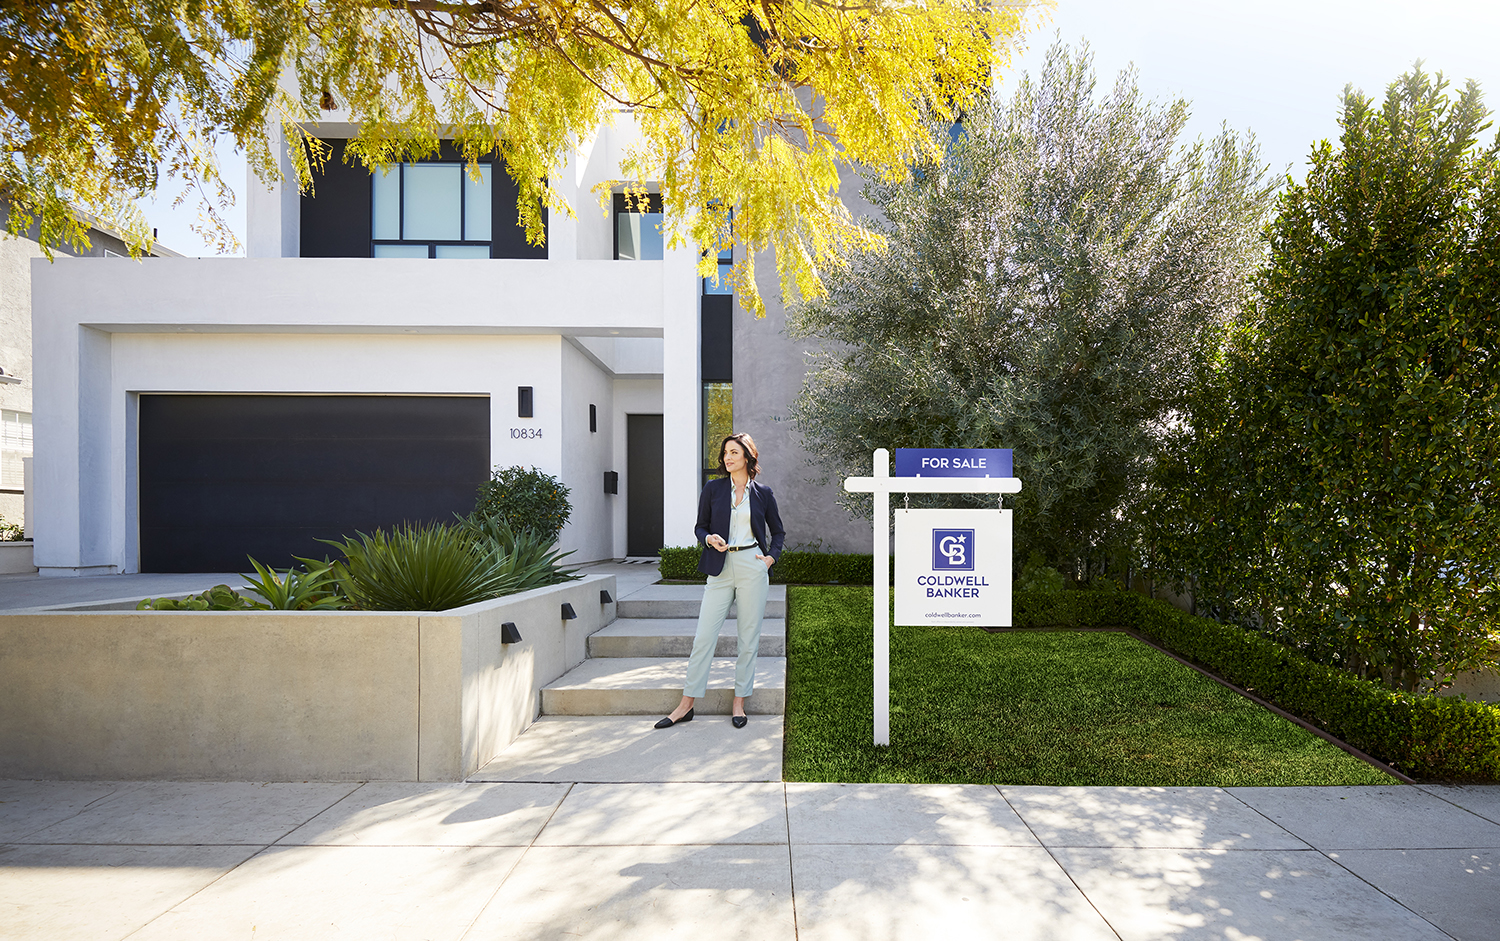 Agent standing in front of a house with a Coldwell Banker signage